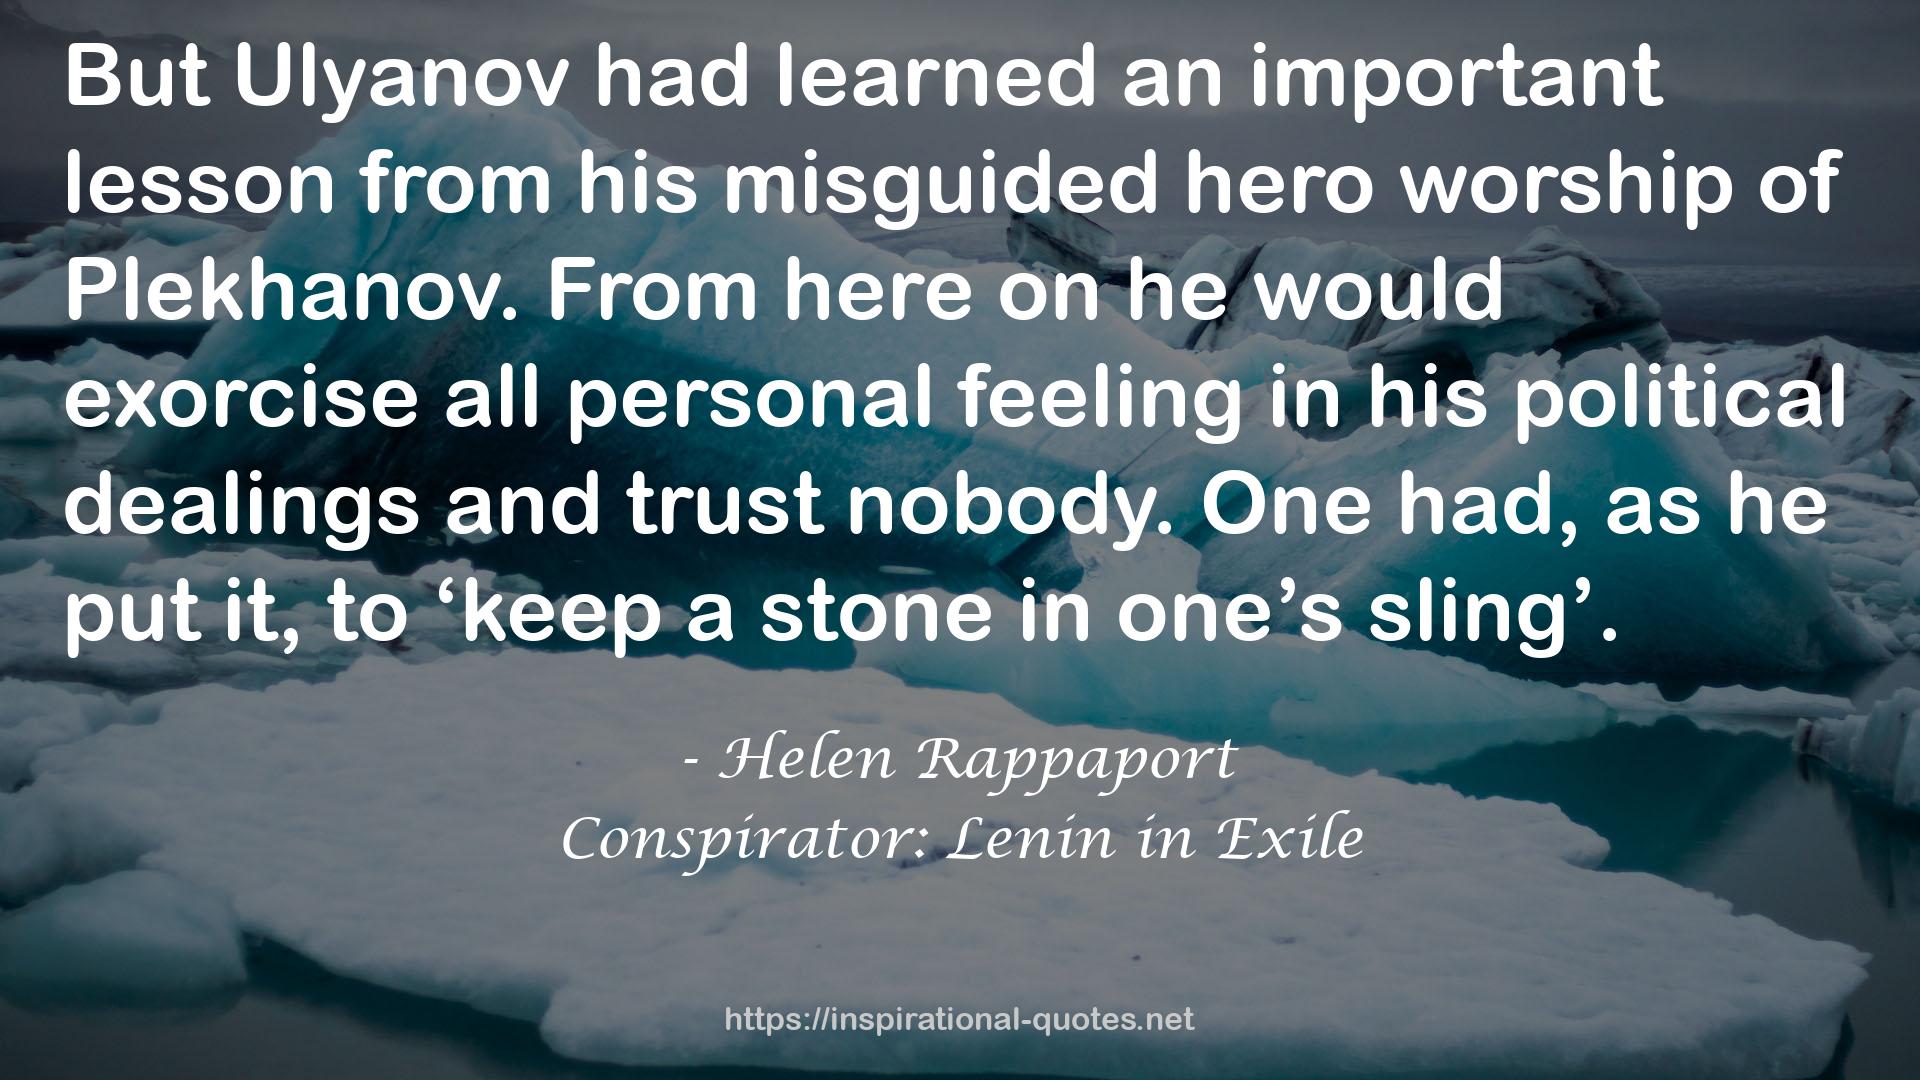 Conspirator: Lenin in Exile QUOTES